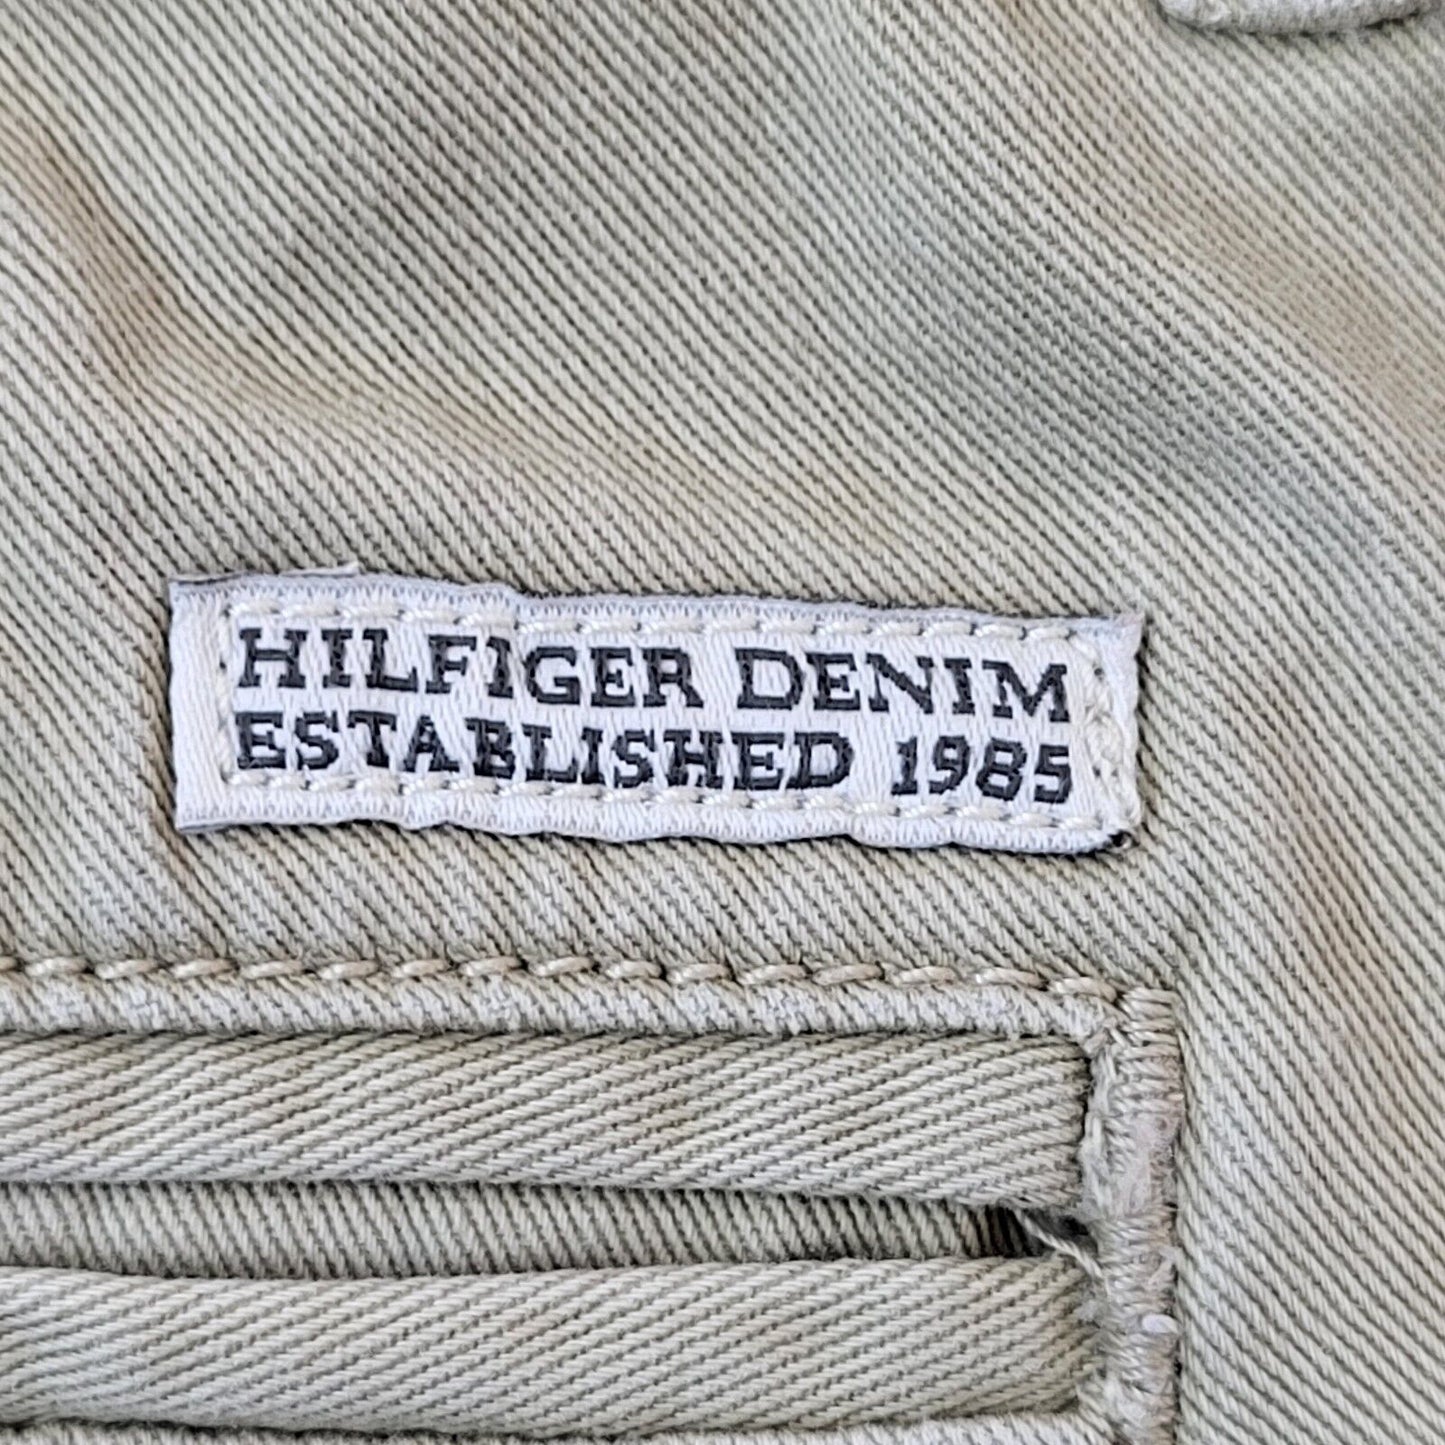 Tommy Hilfiger Trousers (M)